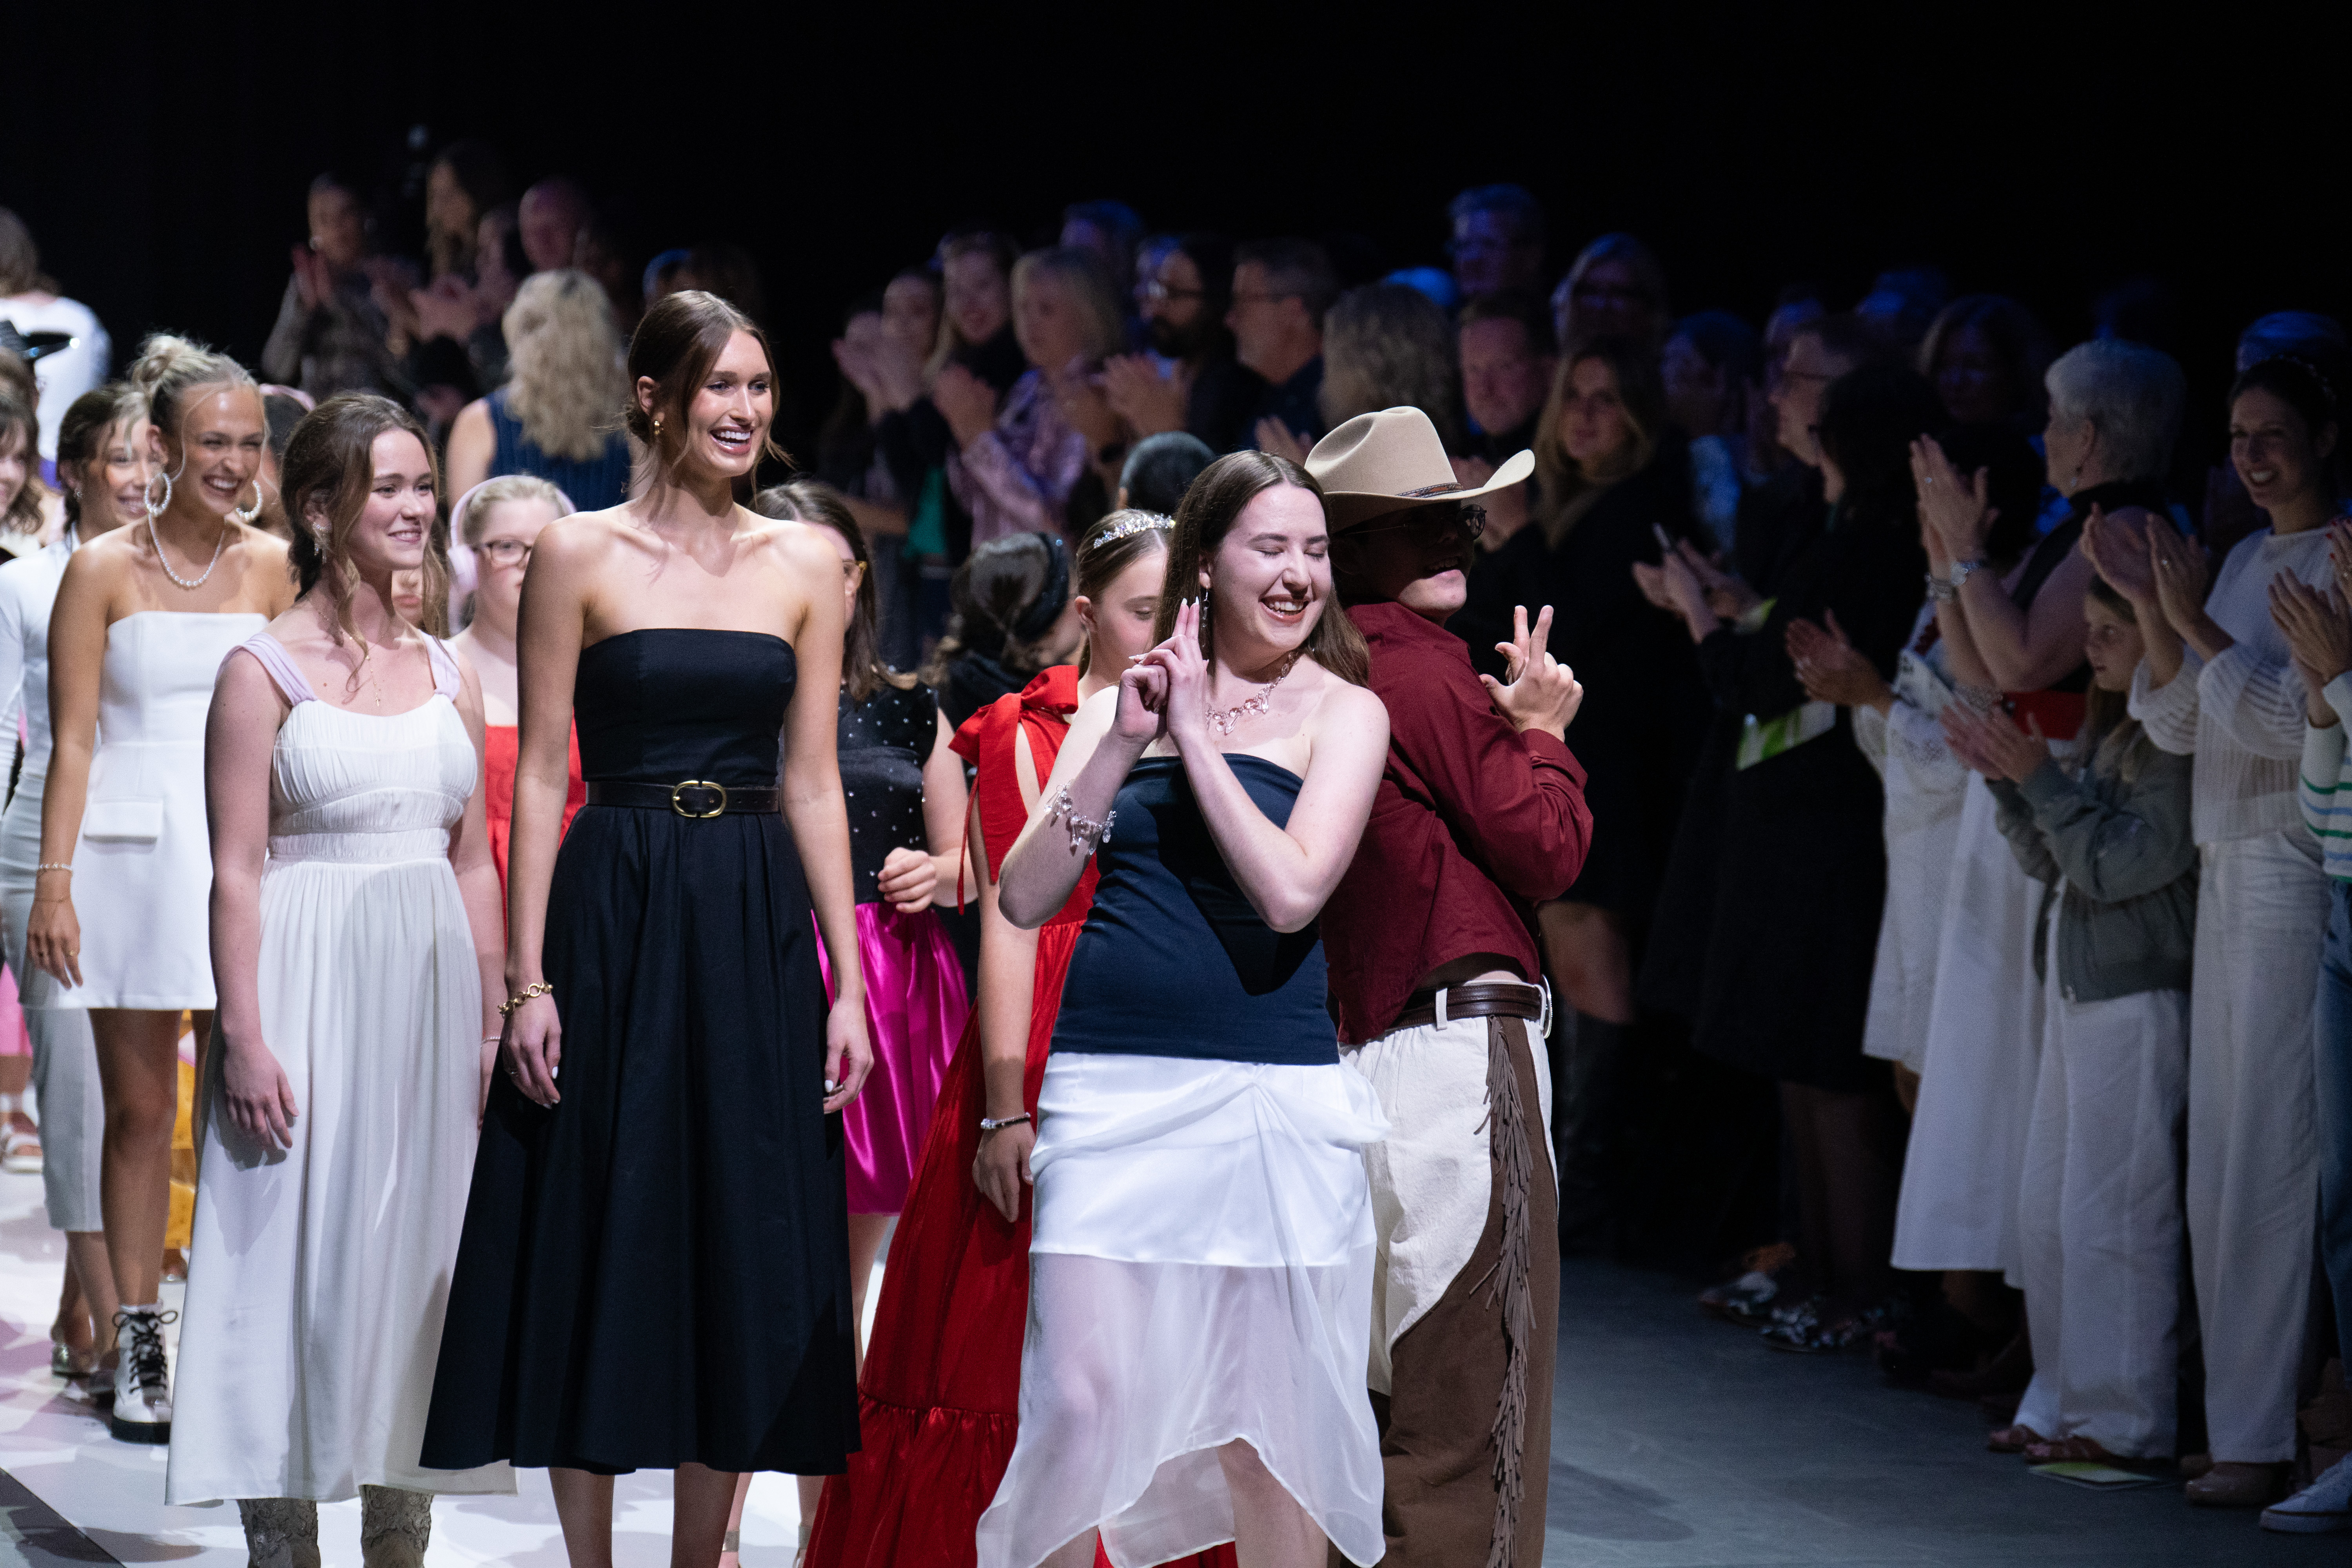 GiGi's participants and designers on the runway